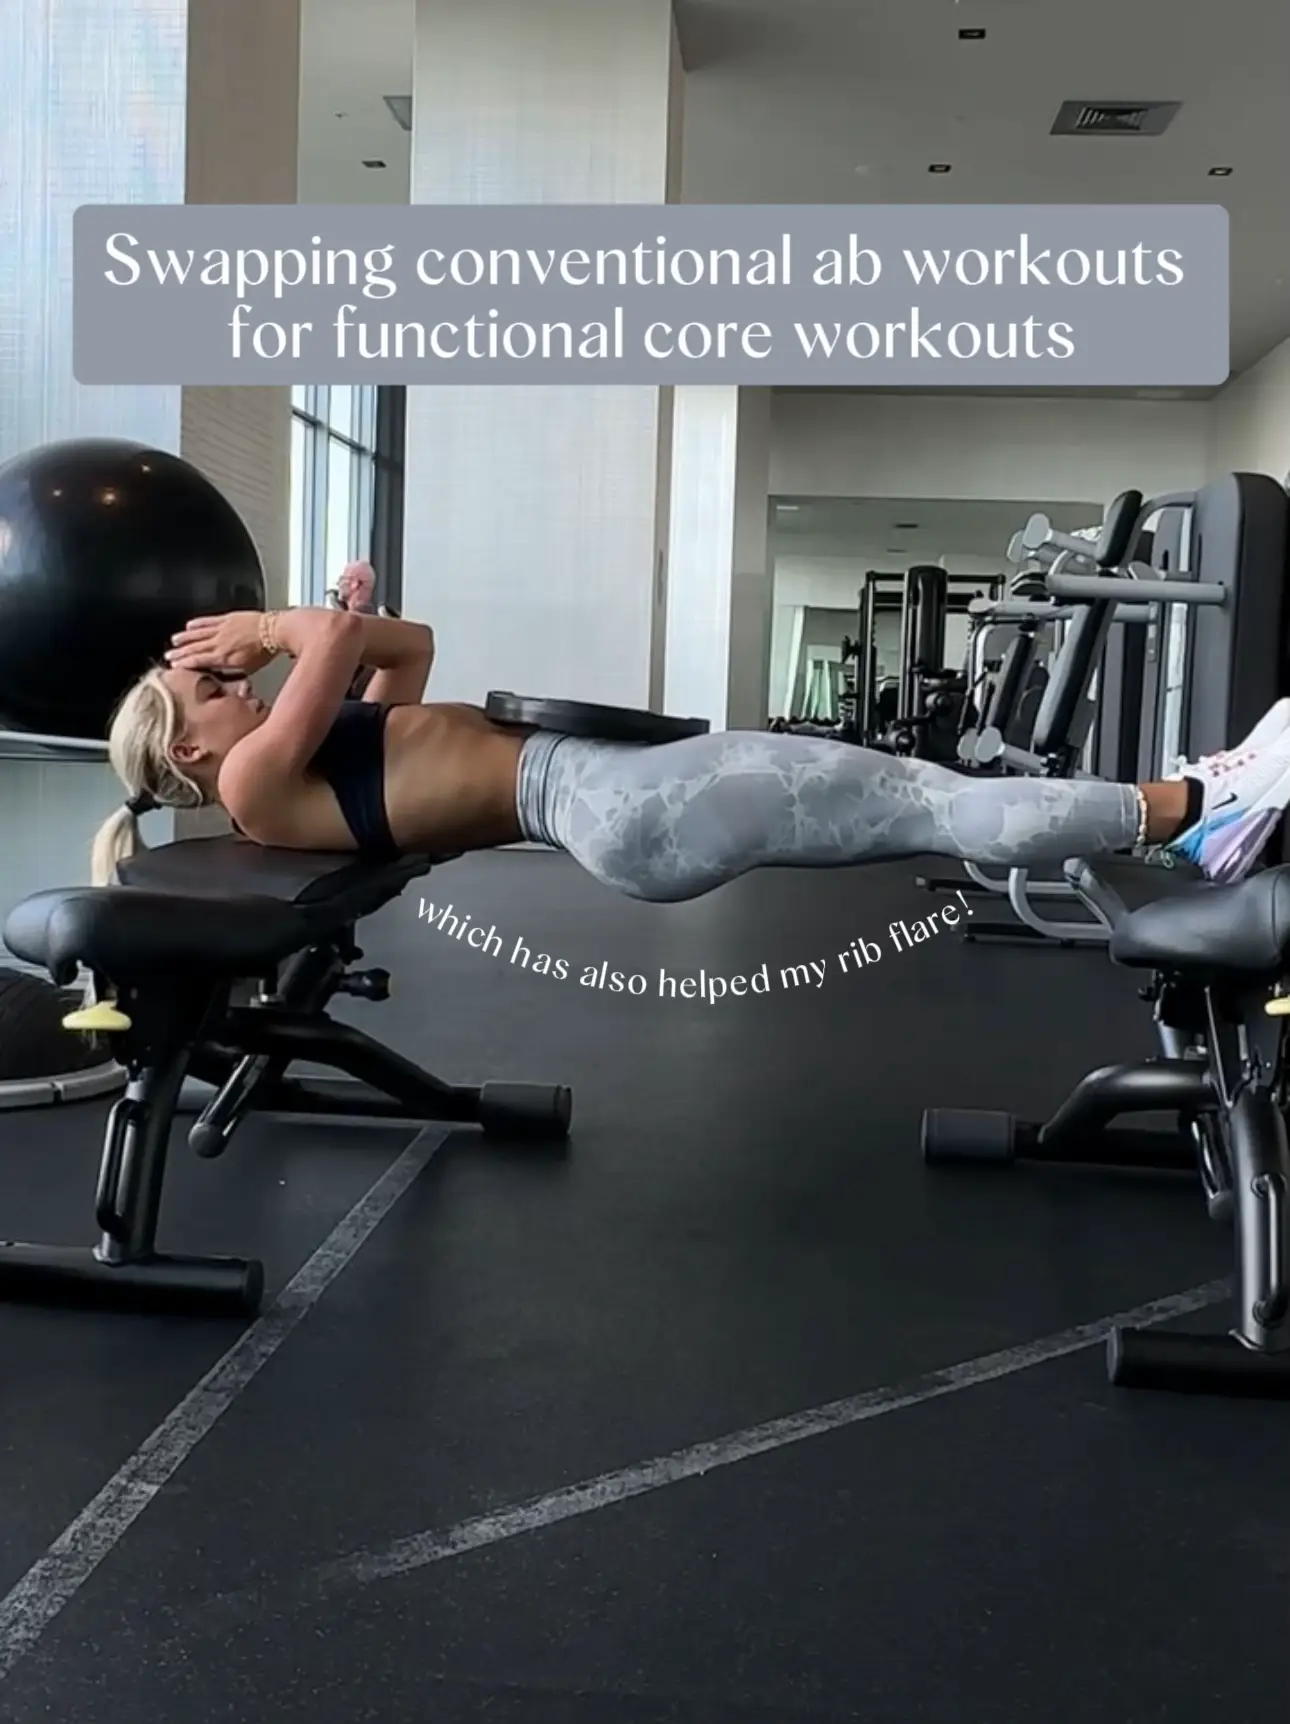 Core Fitness For Moms - Rib flaring can happen in everyday moves